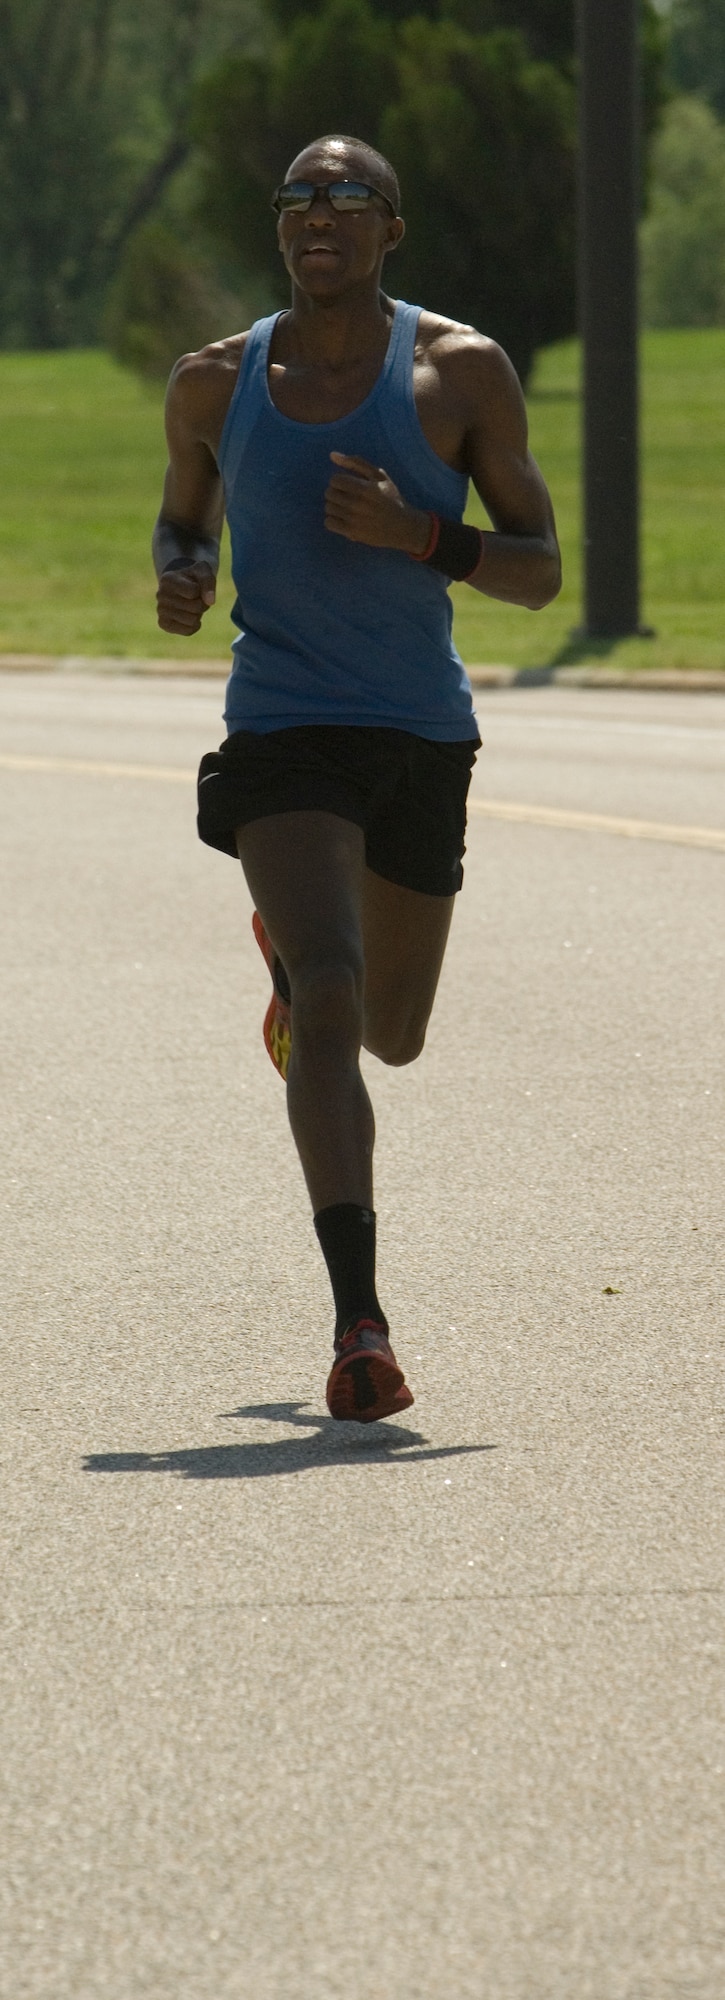 Airman 1st Class Moses Tum, 22nd Comptroller Squadron customer service technician, pulls away from competitors during a 5k run May 22, 2010, McConnell Air Force Base, Kan. Airman Tum recently broke the Wichita Rosstoberfest 5K course record with a time of 15 minutes, 13 seconds. He has ran his mile and a half in 6:56, setting a new McConnell Air Force Base record. (U.S. Air Force photo/Airman 1st Class Armando A. Schwier-Morales)  